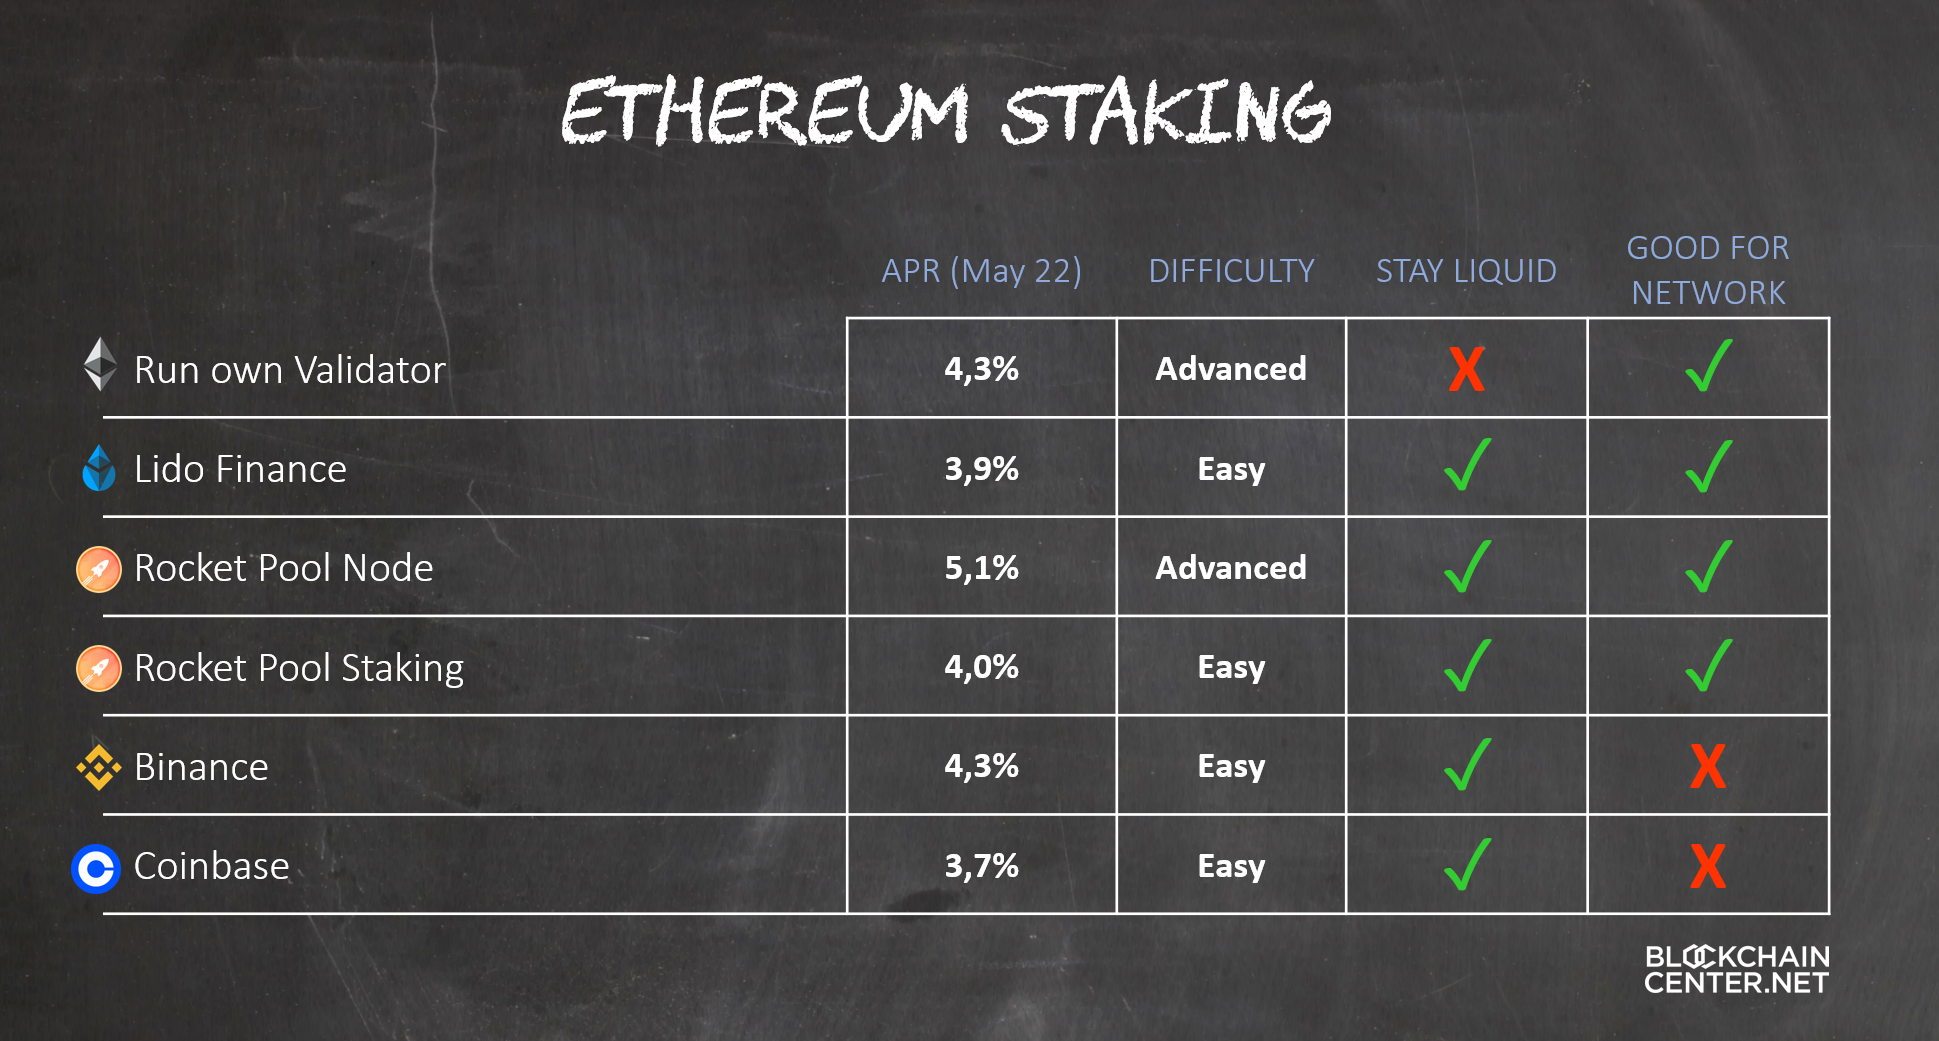 What Is Ethereum 2.0?